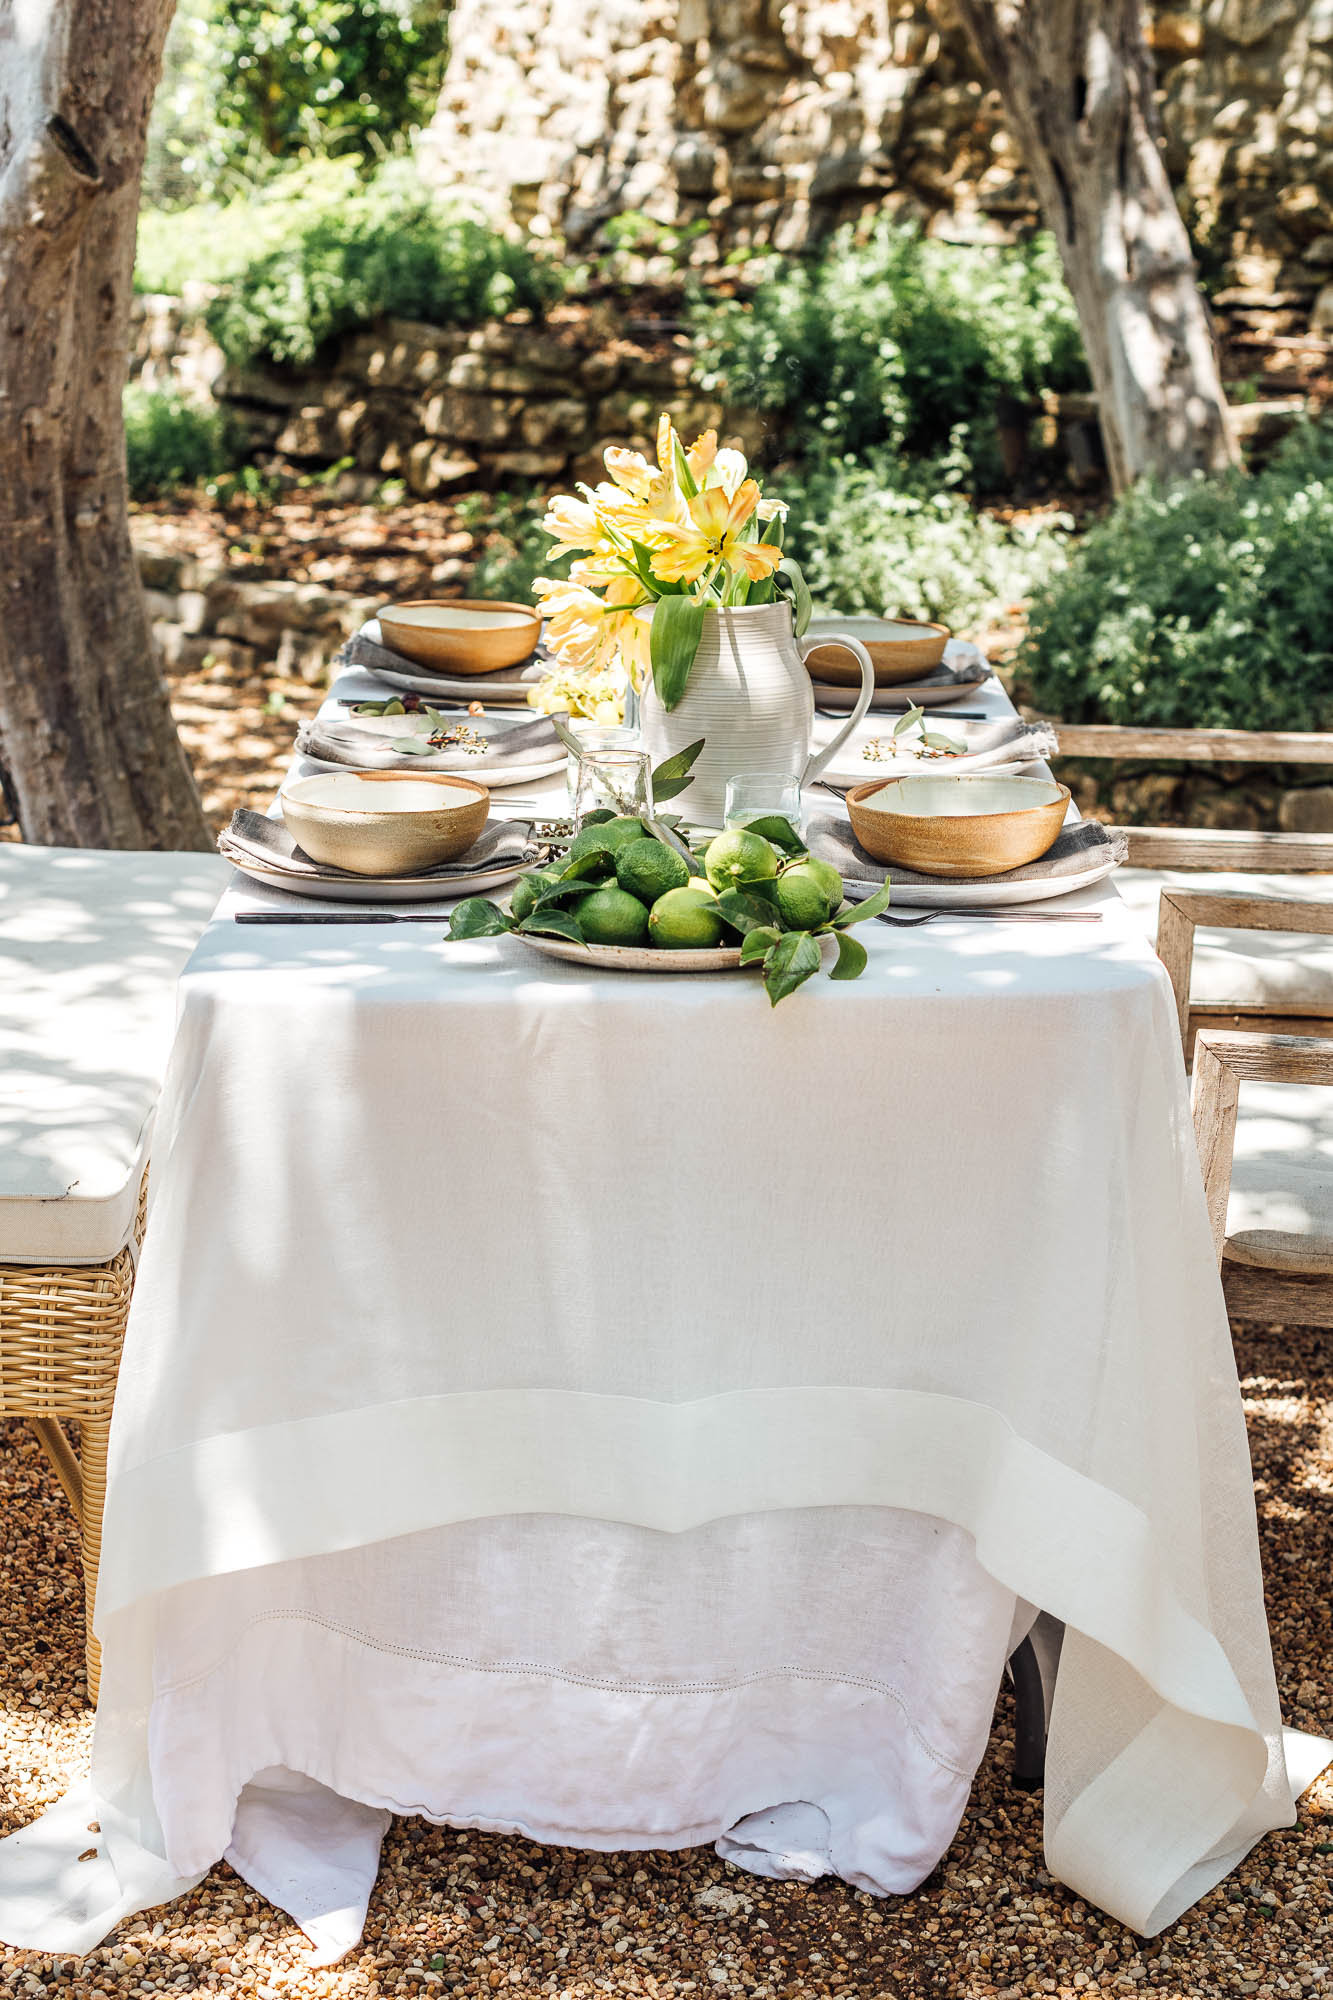 summer table setting ideas for a backyard dinner party, tulips and limes, camille styles backyard